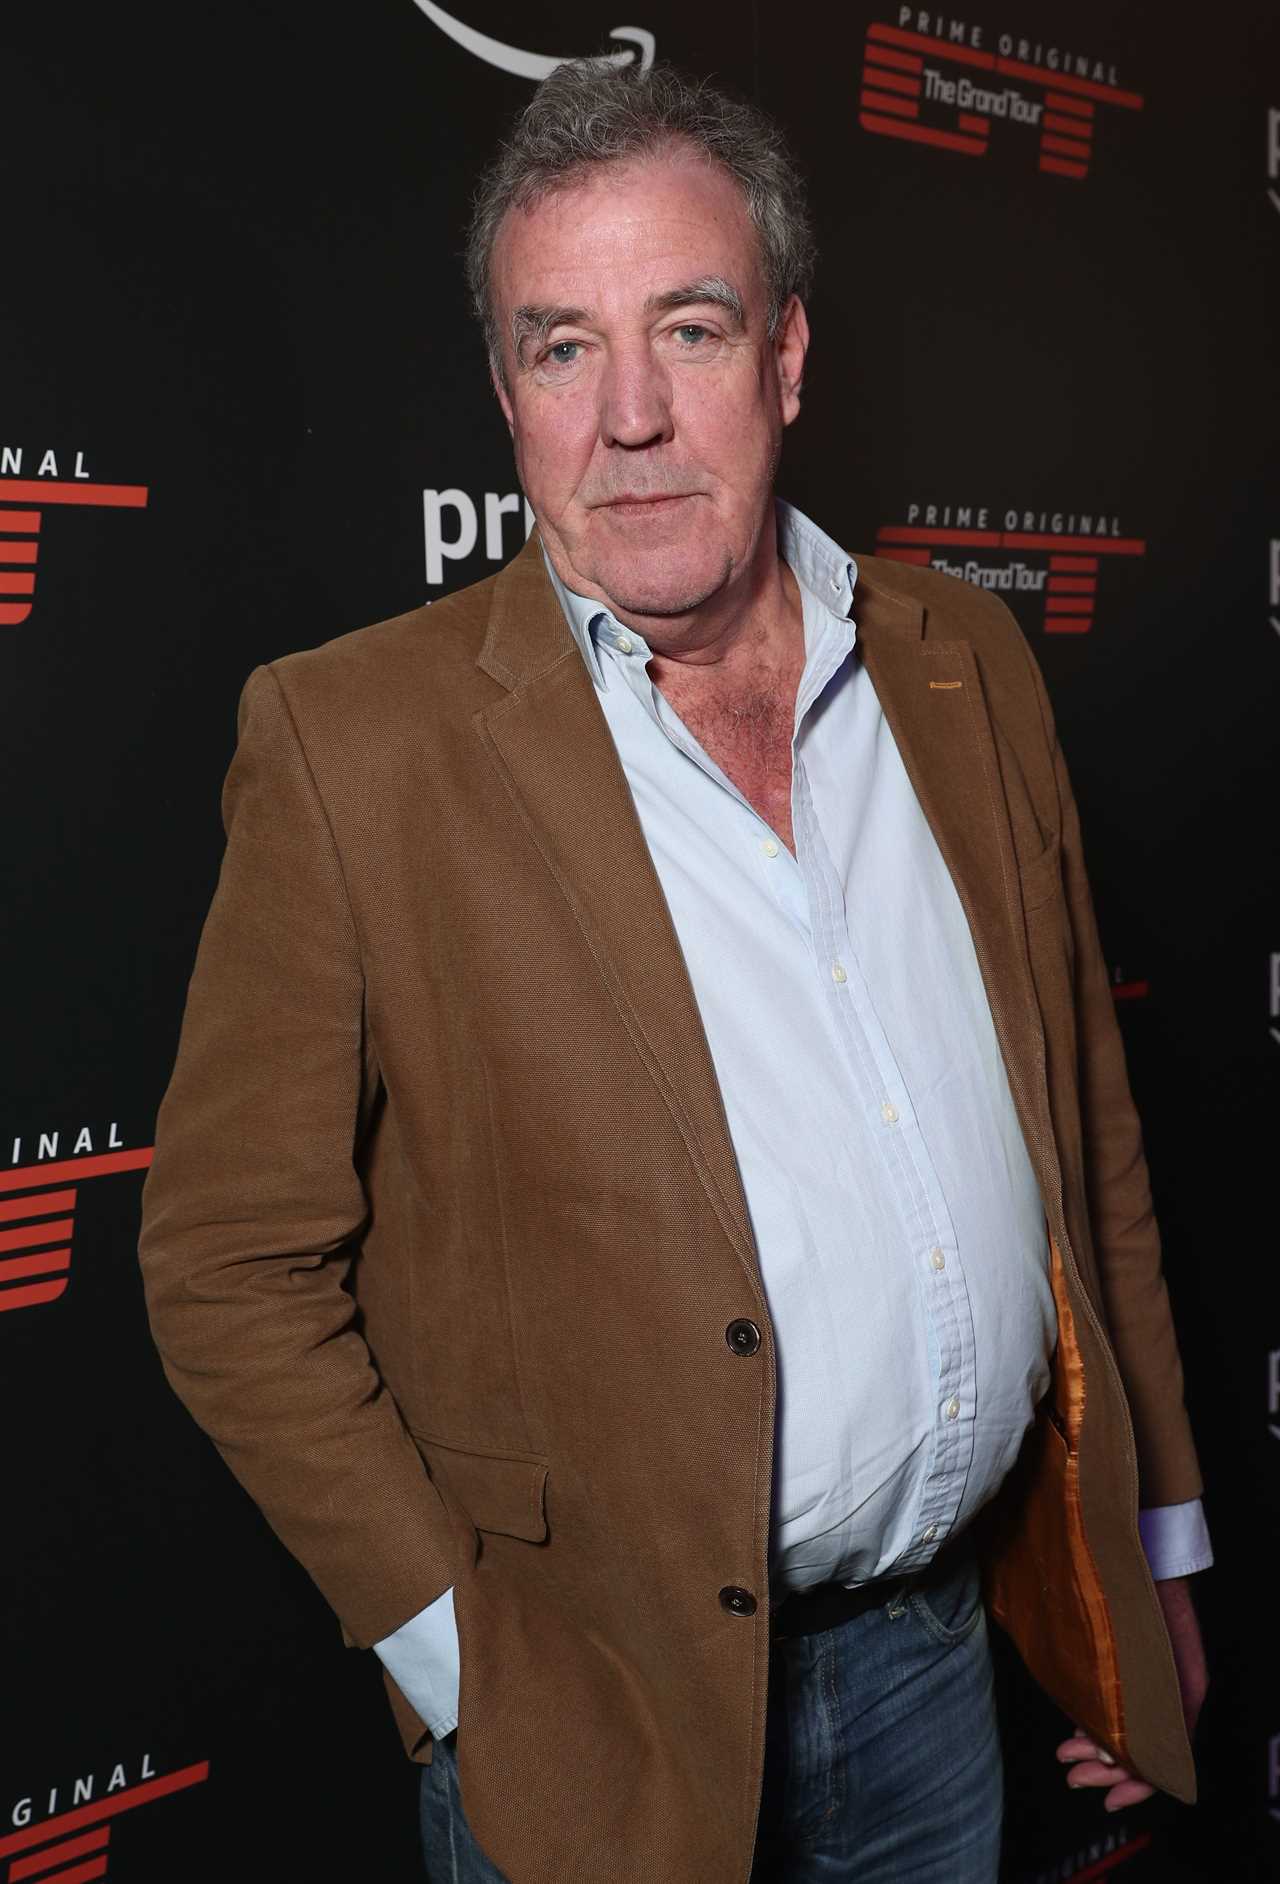 What is Jeremy Clarkson’s net worth?